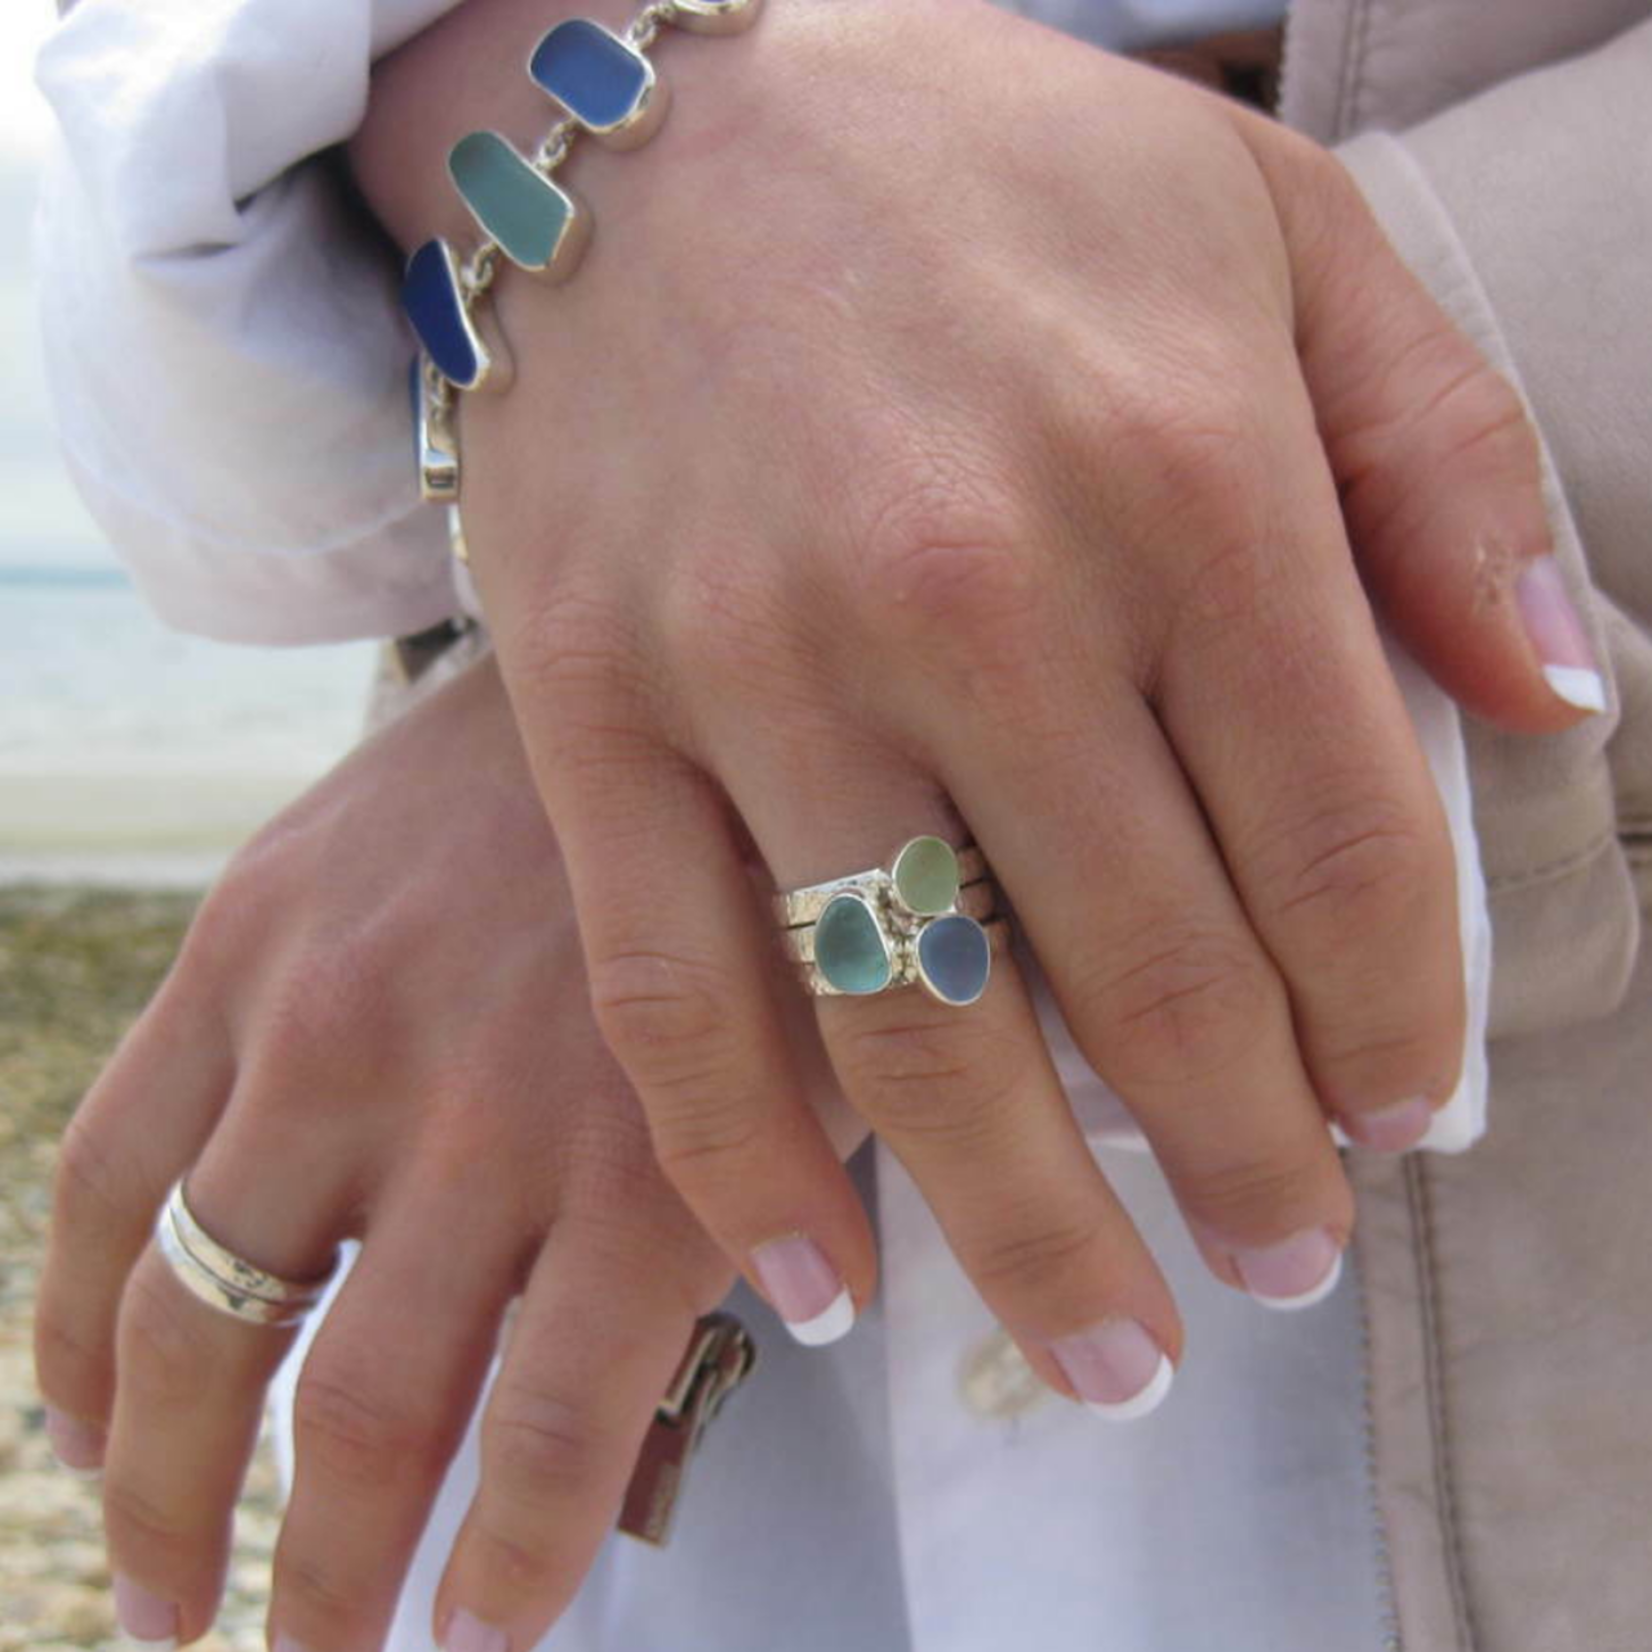 4 Sea Glass Stack Rings